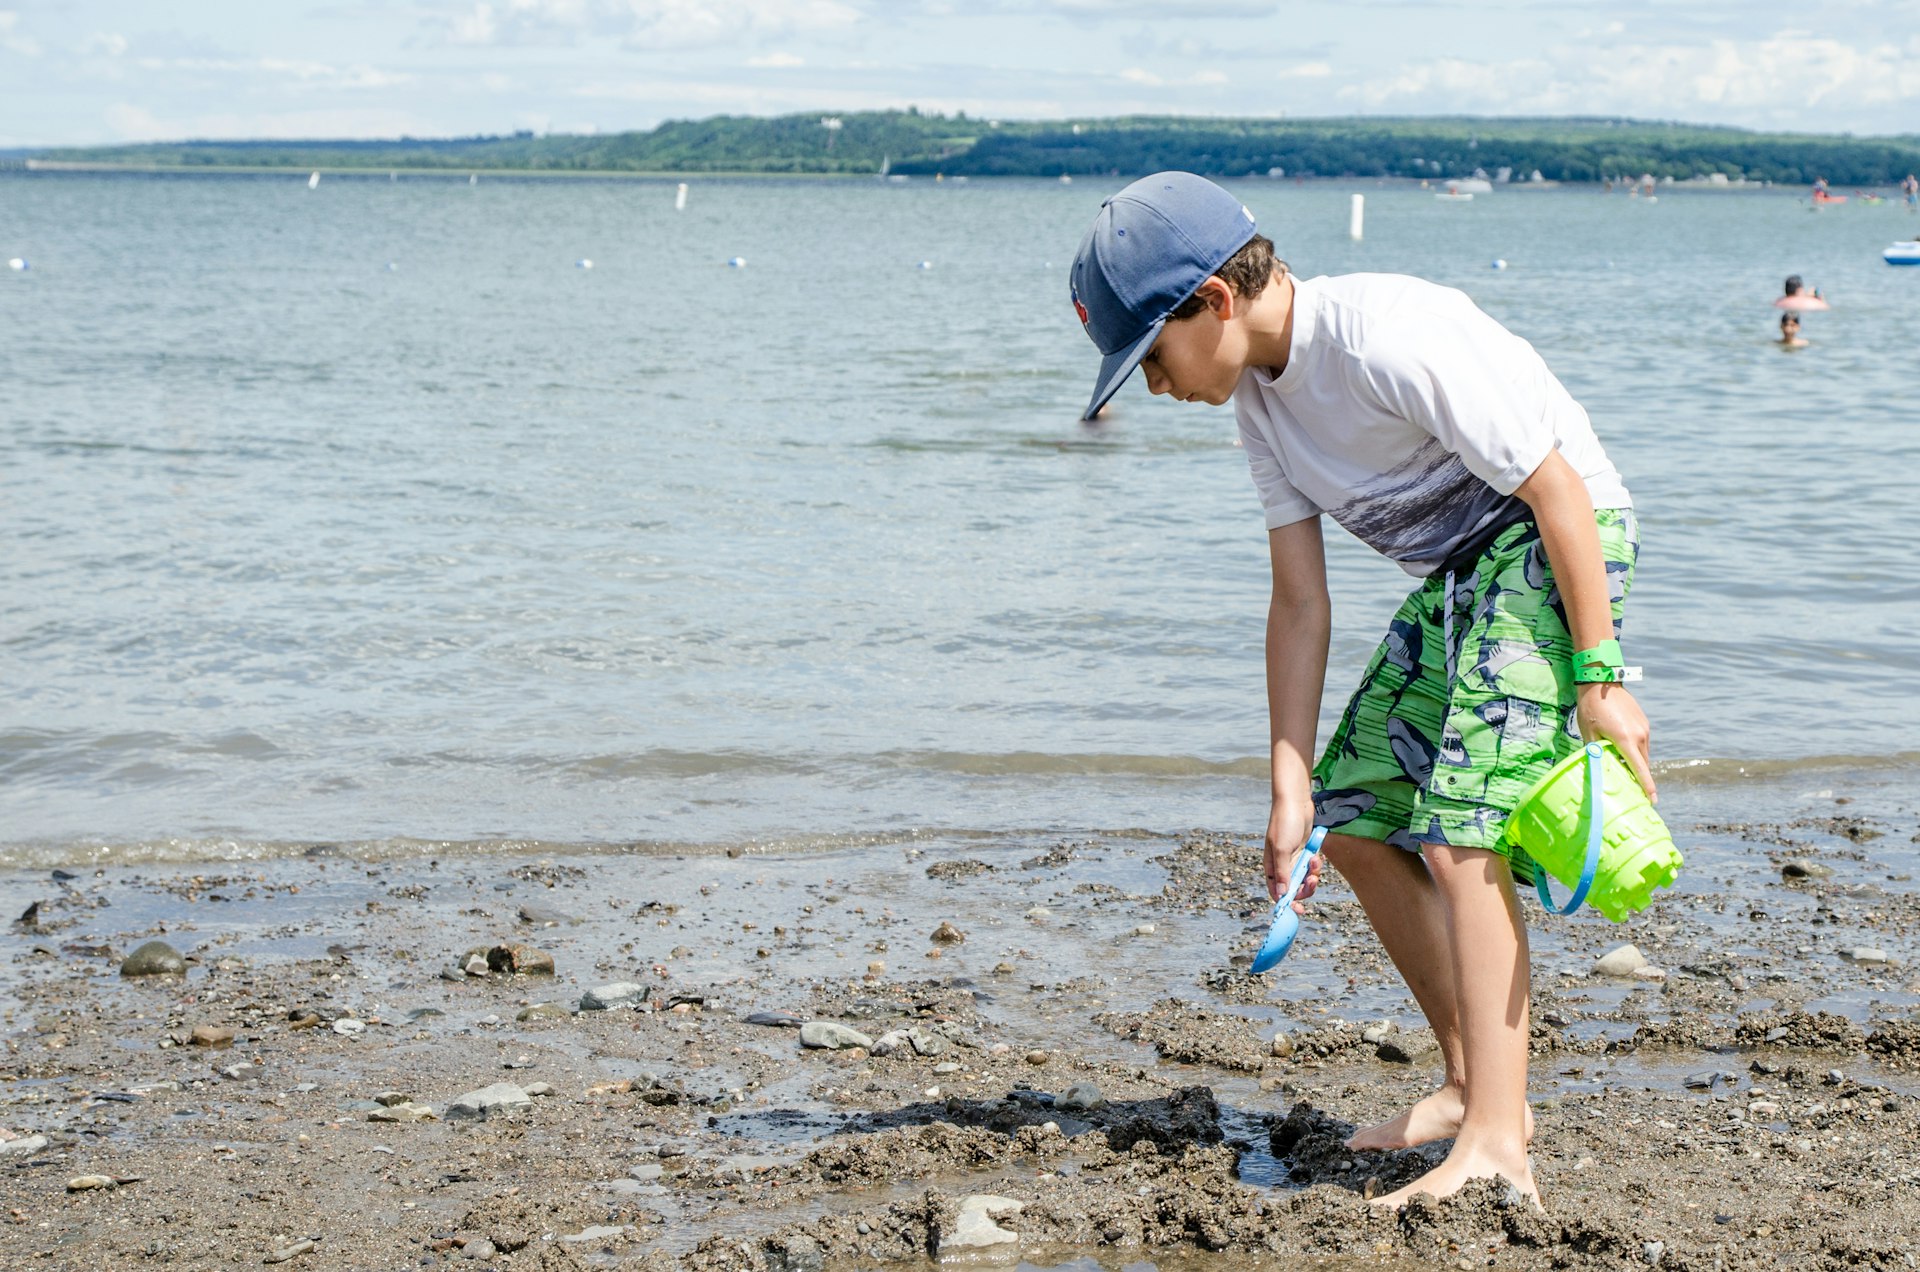 A boy plays on the beach close to the St-Lawrence River in summer, Québec City, Québec, Canada